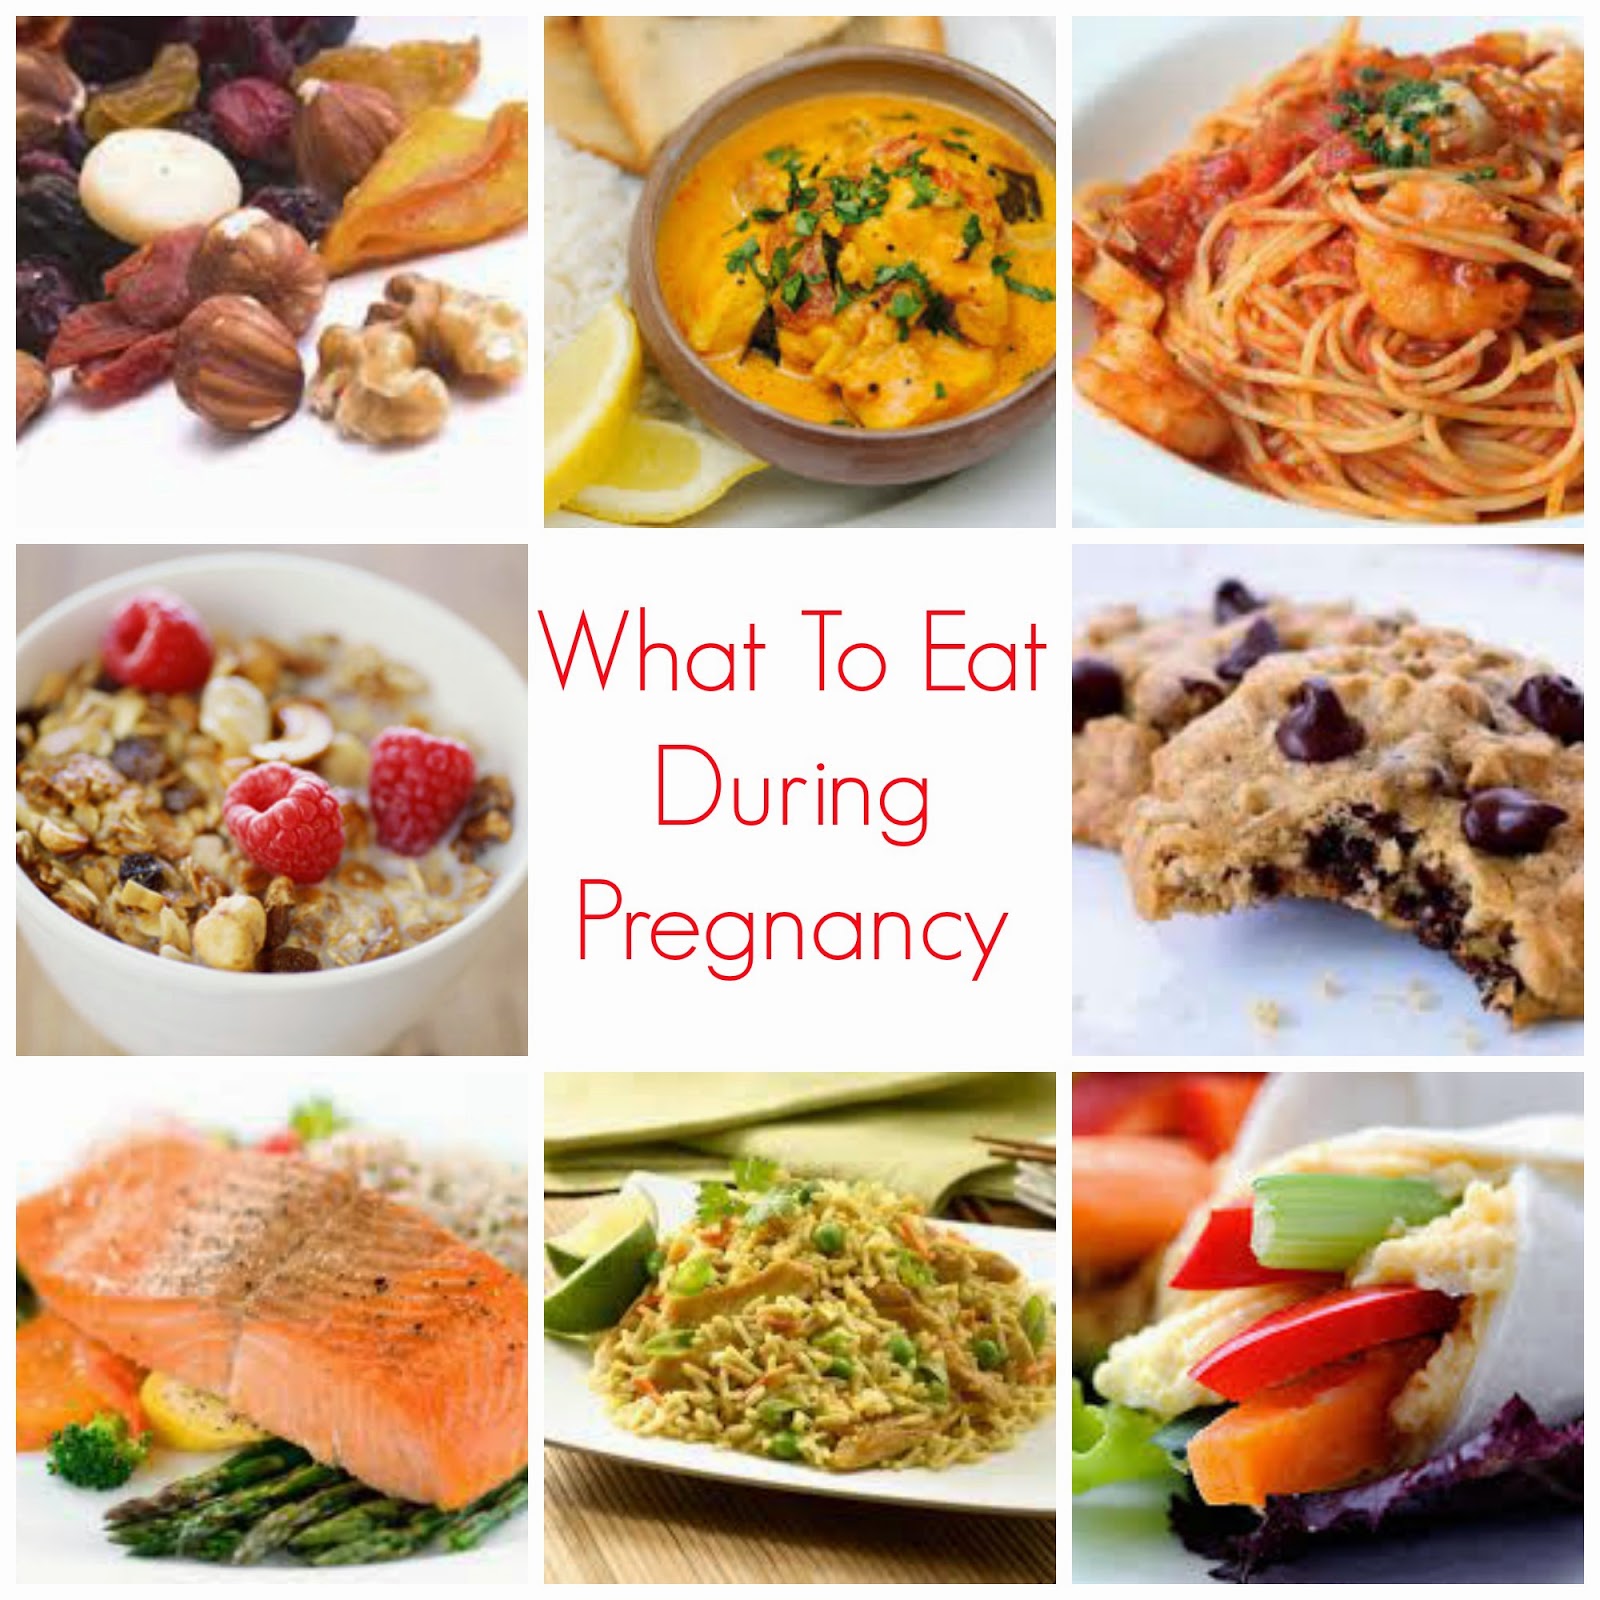 What To Eat During Pregnancy | Pregnancy Resources | The Chill Mom